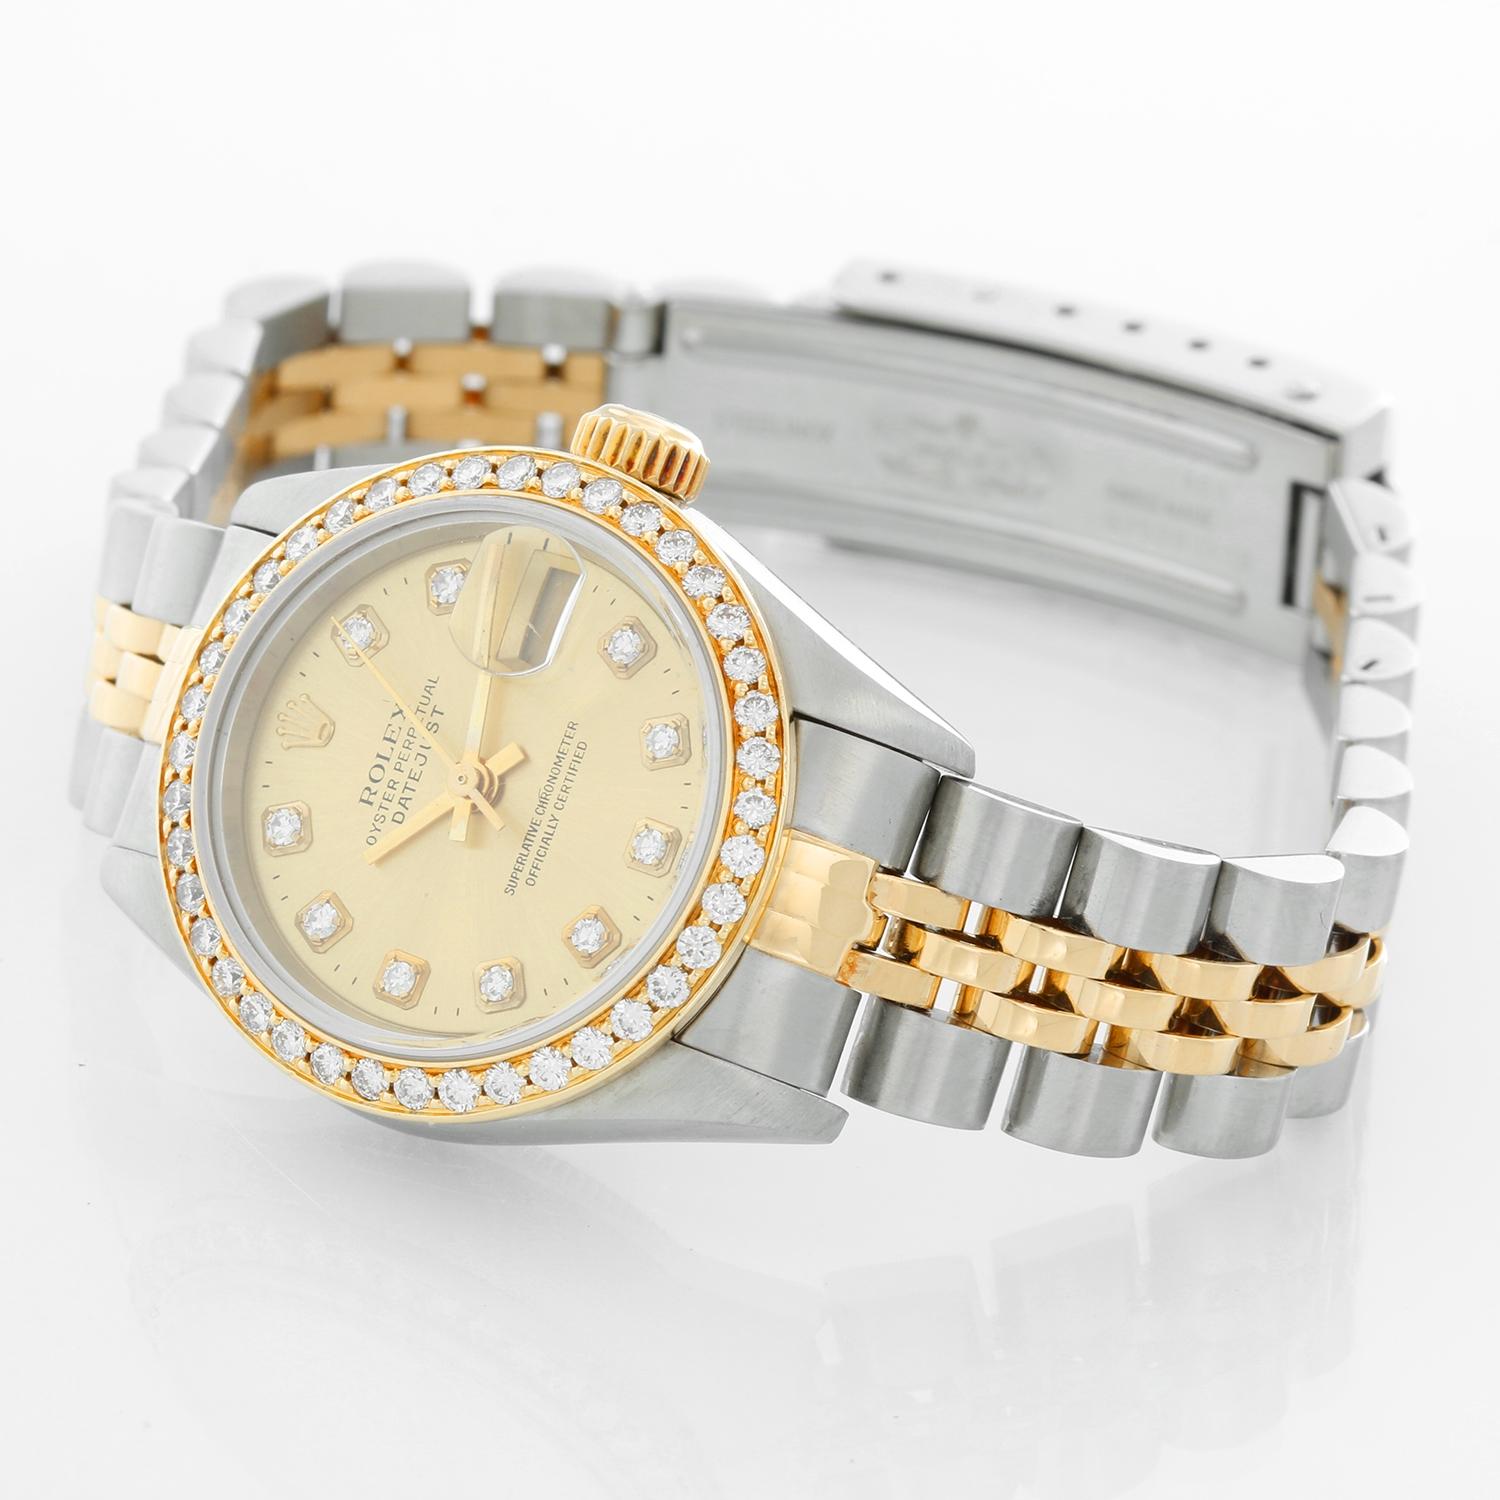 Rolex  2-Tone Datejust Steel & Gold Ladies Watch 69173 - Automatic winding, 29 jewels, Quickset date, sapphire crystal. Stainless steel case with custom diamond bezel. Factory Champagne diamond dial. Stainless steel and 18k yellow gold Jubilee